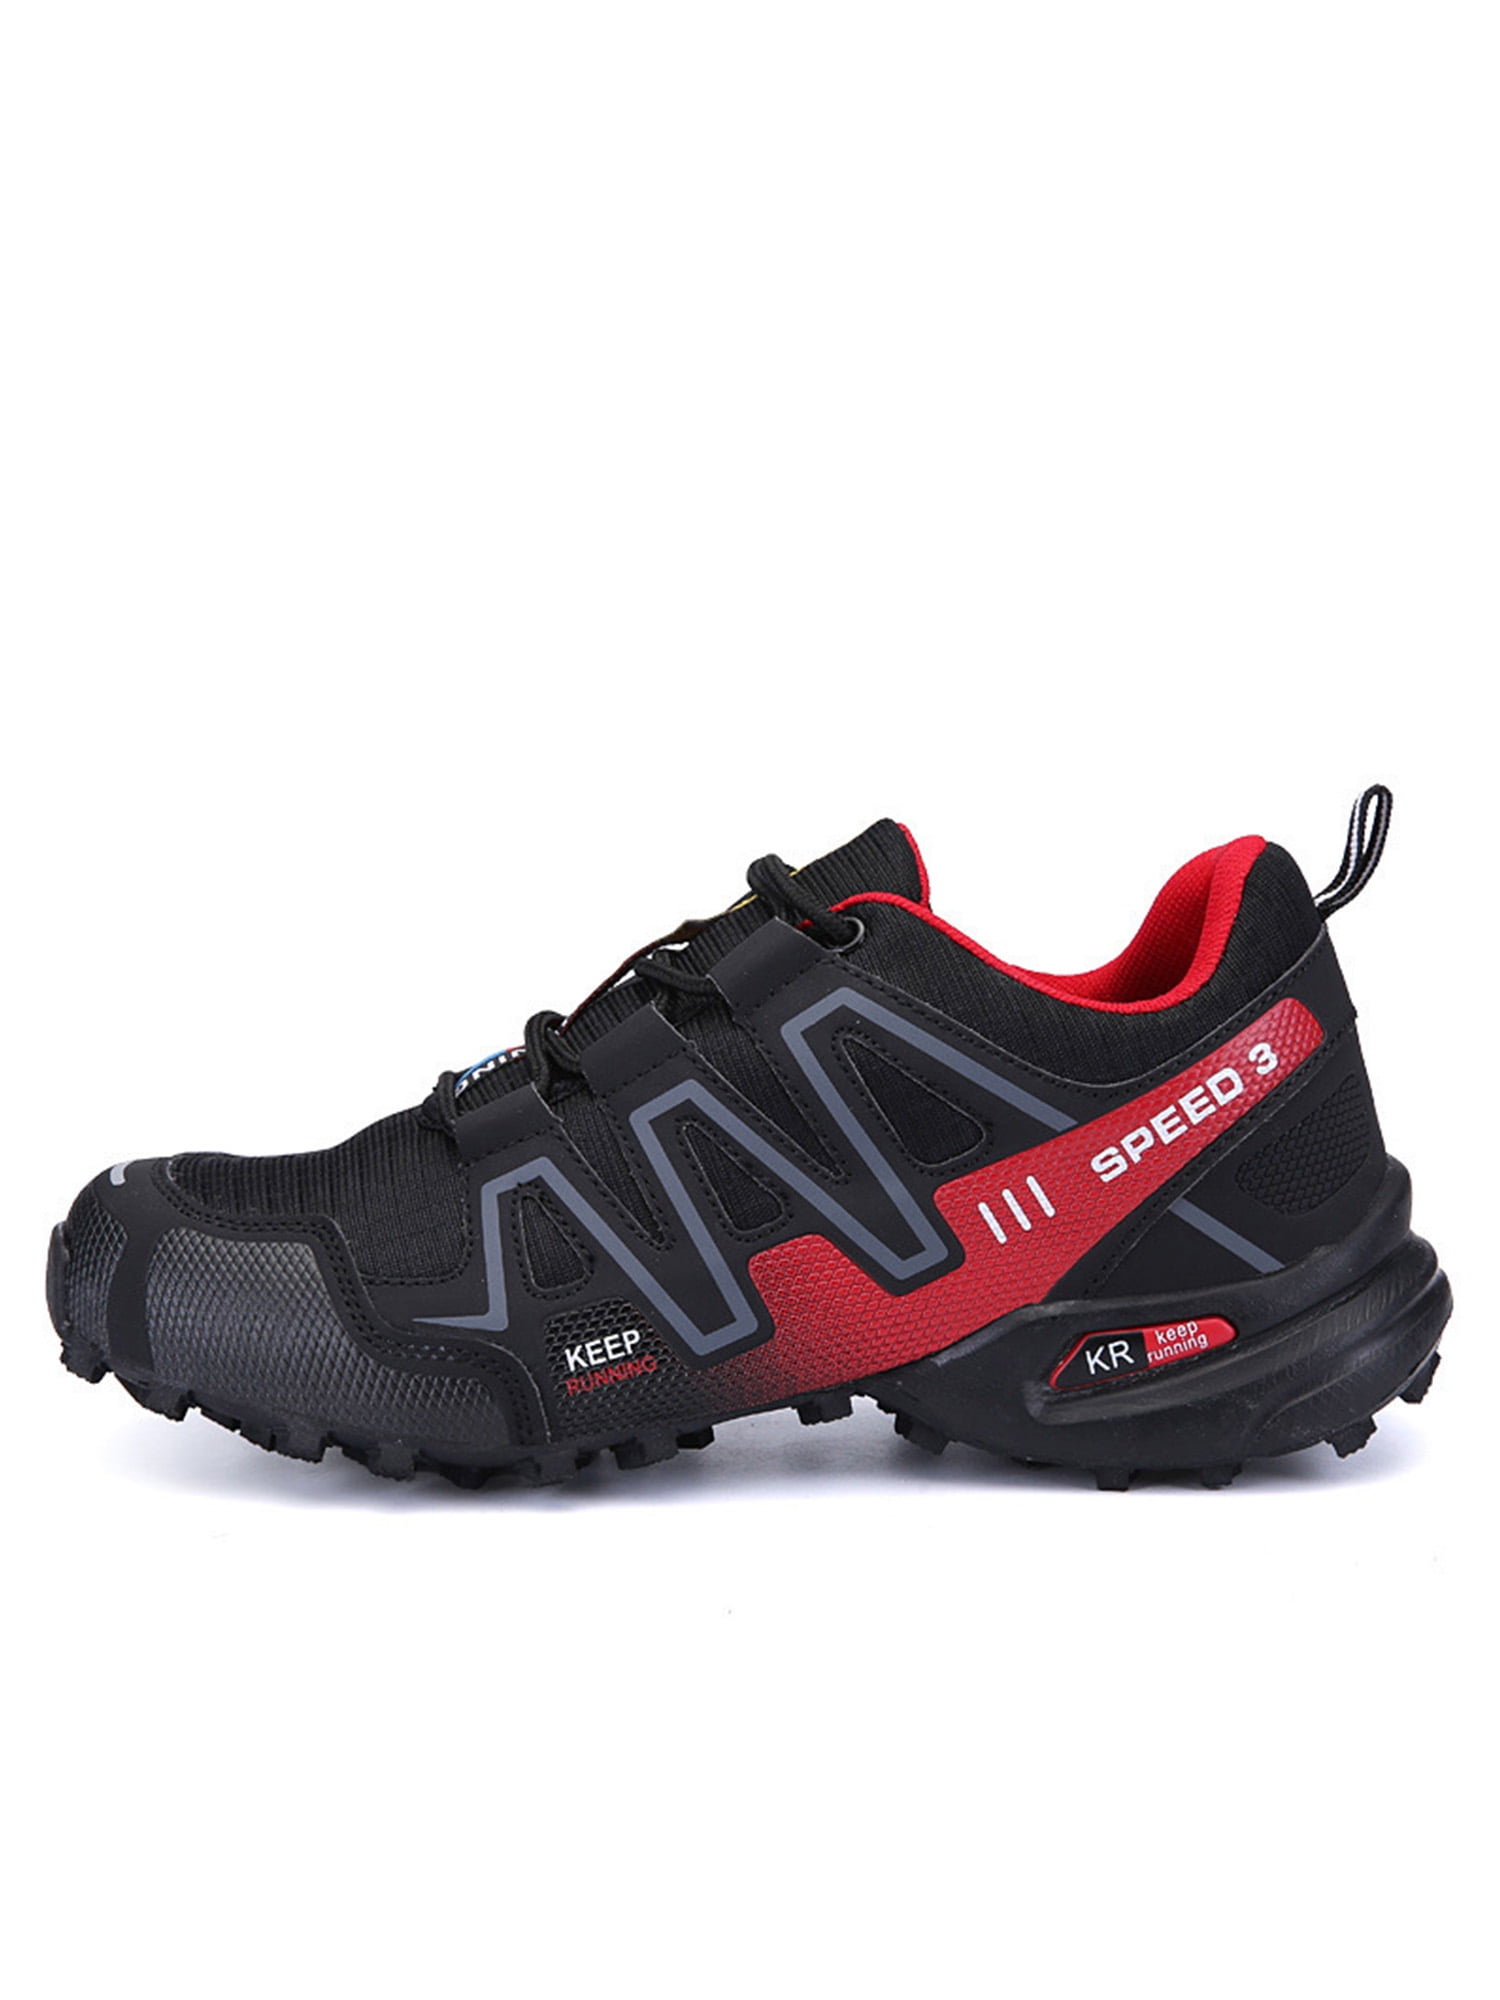 Padgene Mens Hiking Shoes Non Slip Outdoor Lace up Climbing Trail Running Shoes